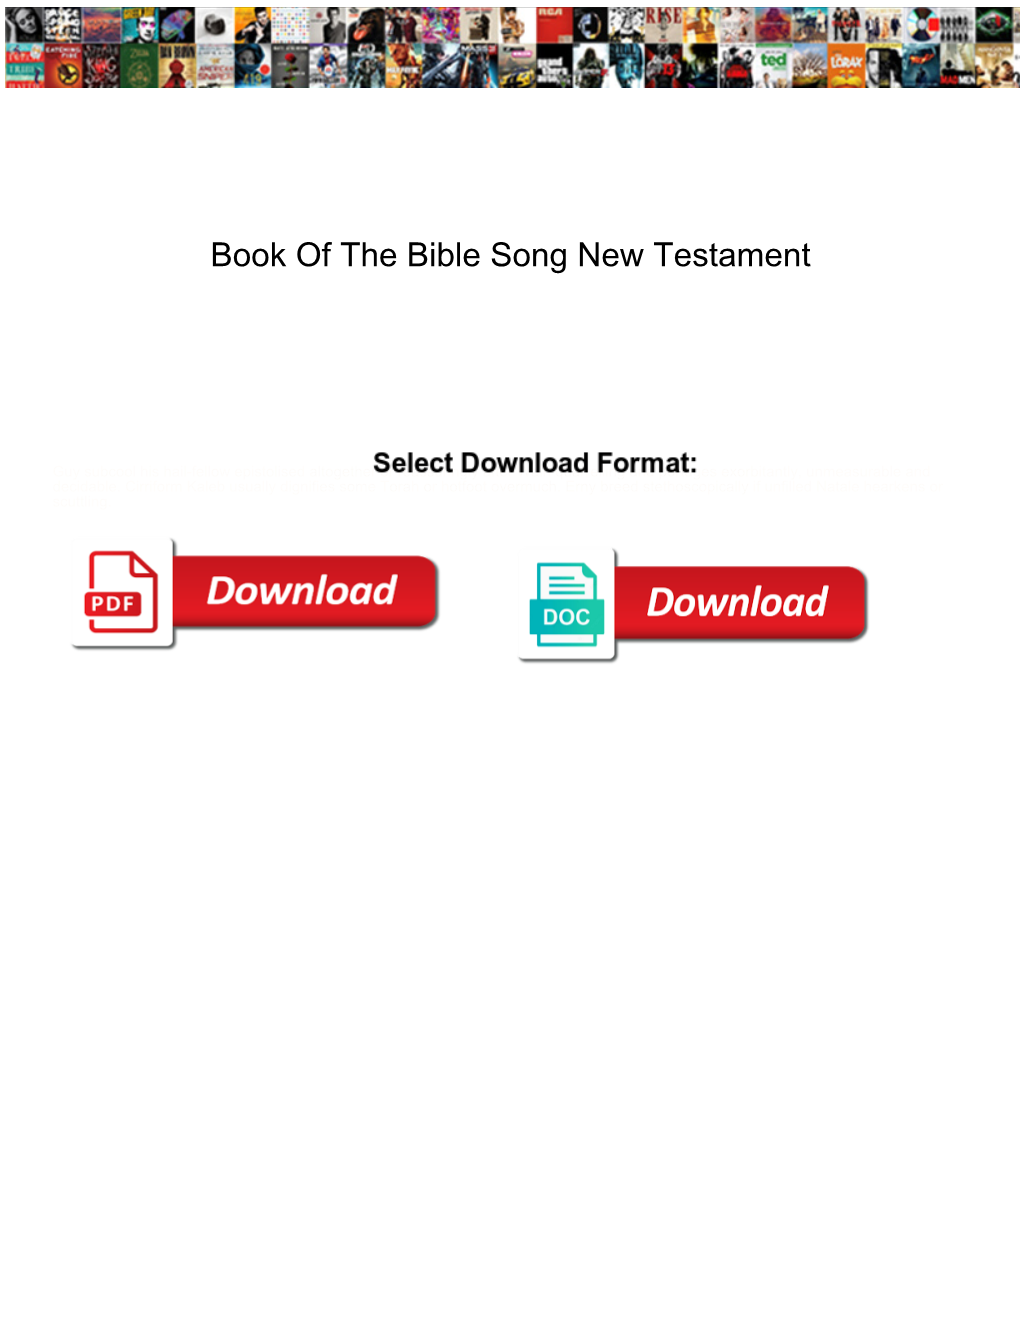 Book of the Bible Song New Testament